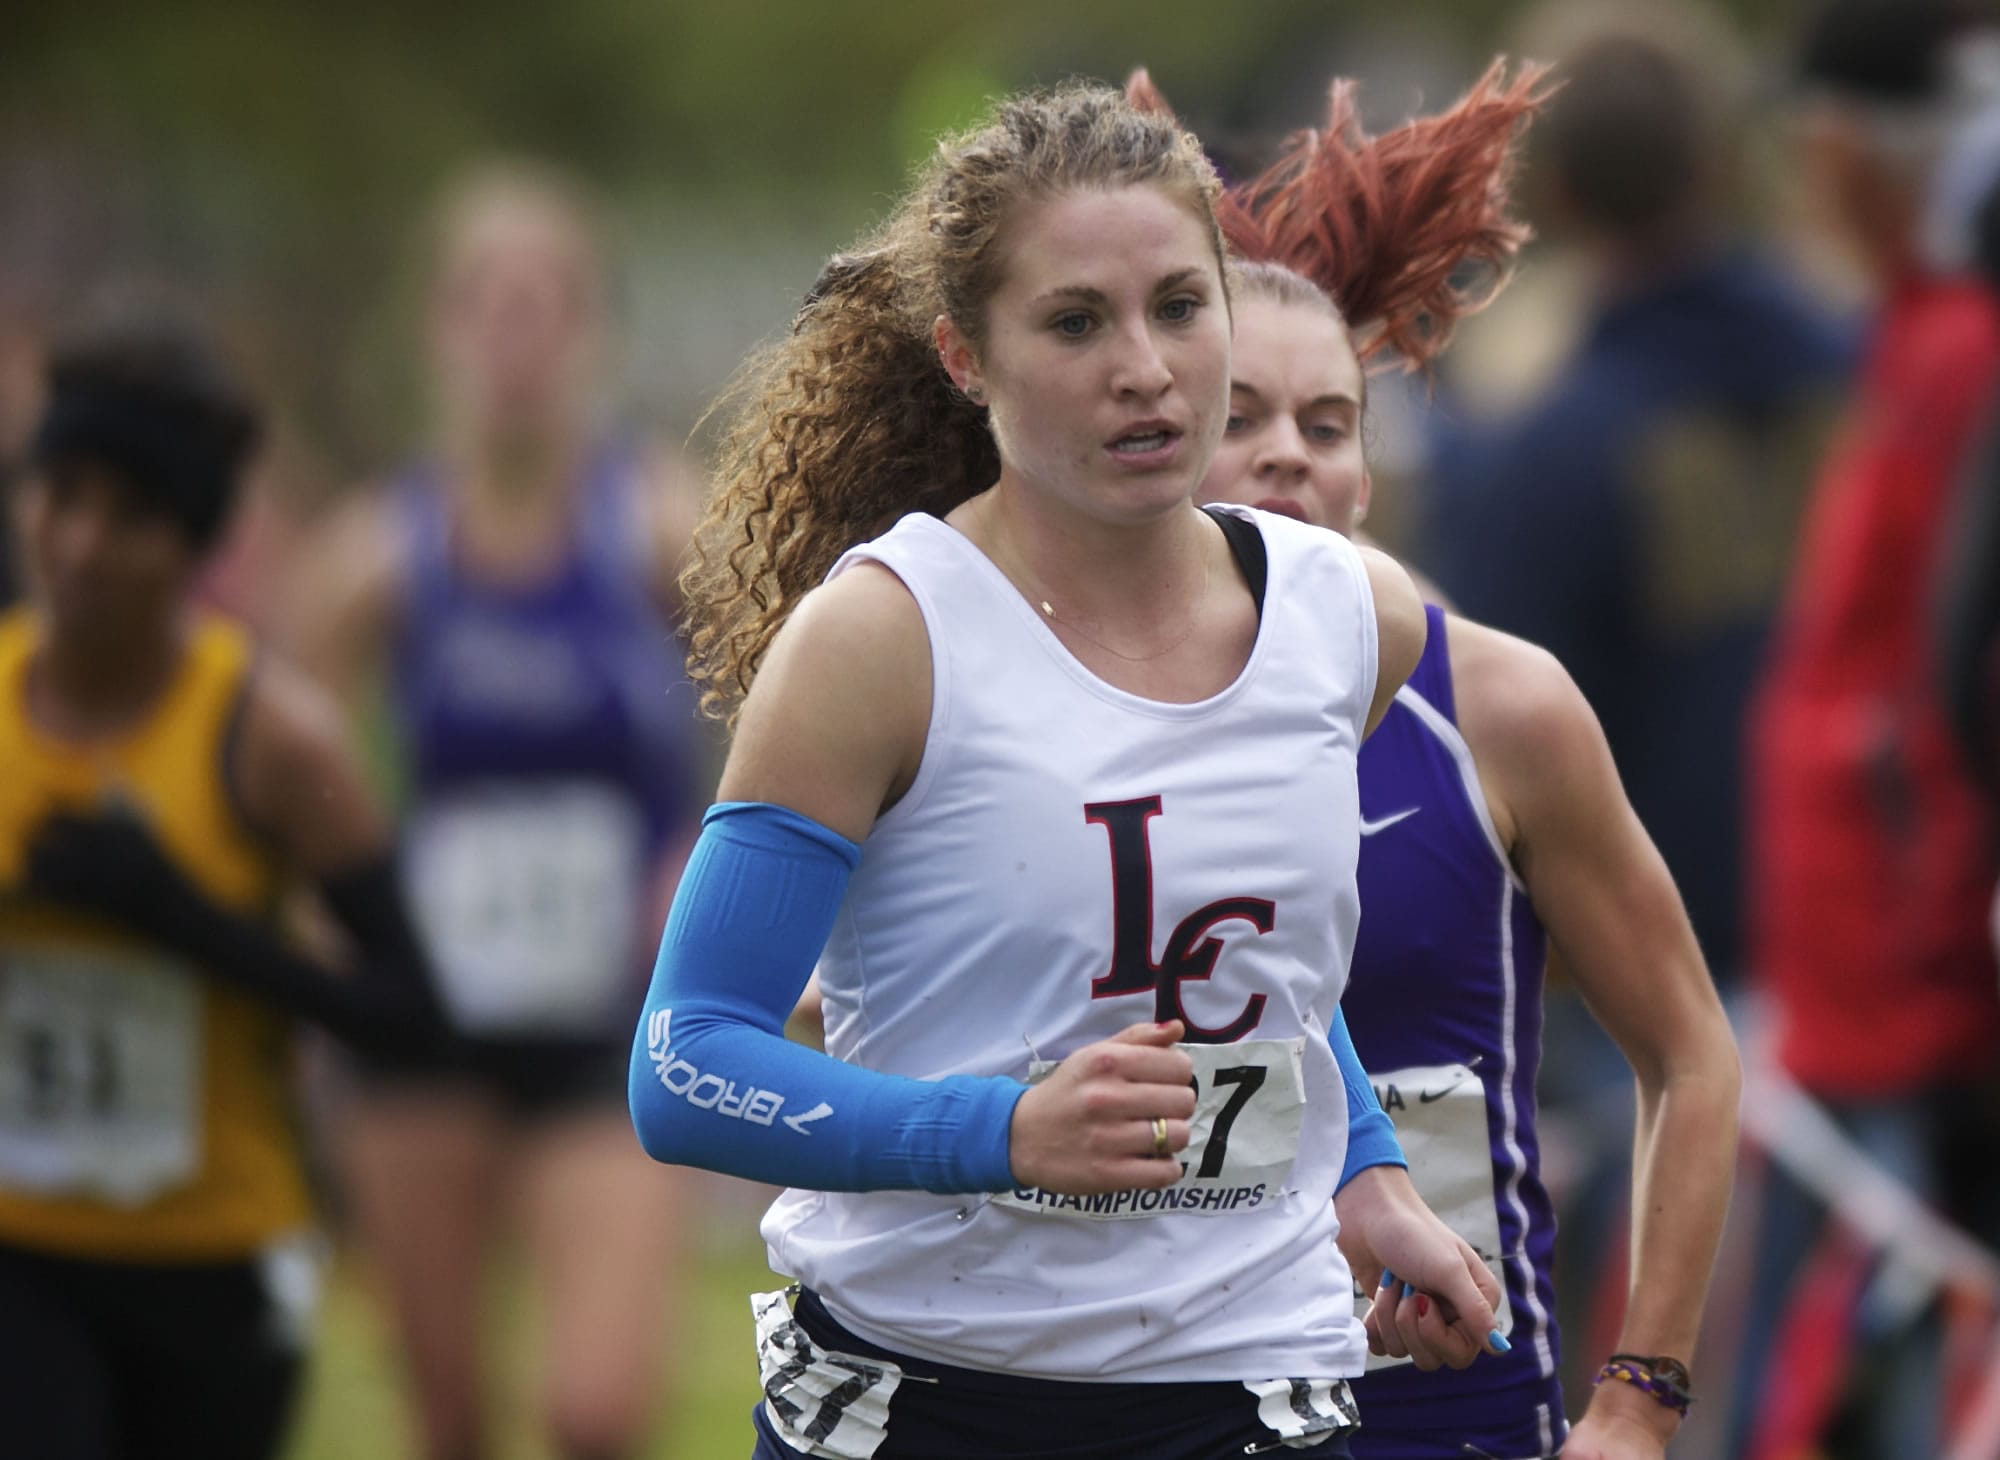 Lewis-Clark State College senior Kelsey Klettke, a graduate of Prairie High School, garnered All-America status for the second time Saturday by placing 11th at NAIA cross country nationals at Fort Vancouver.